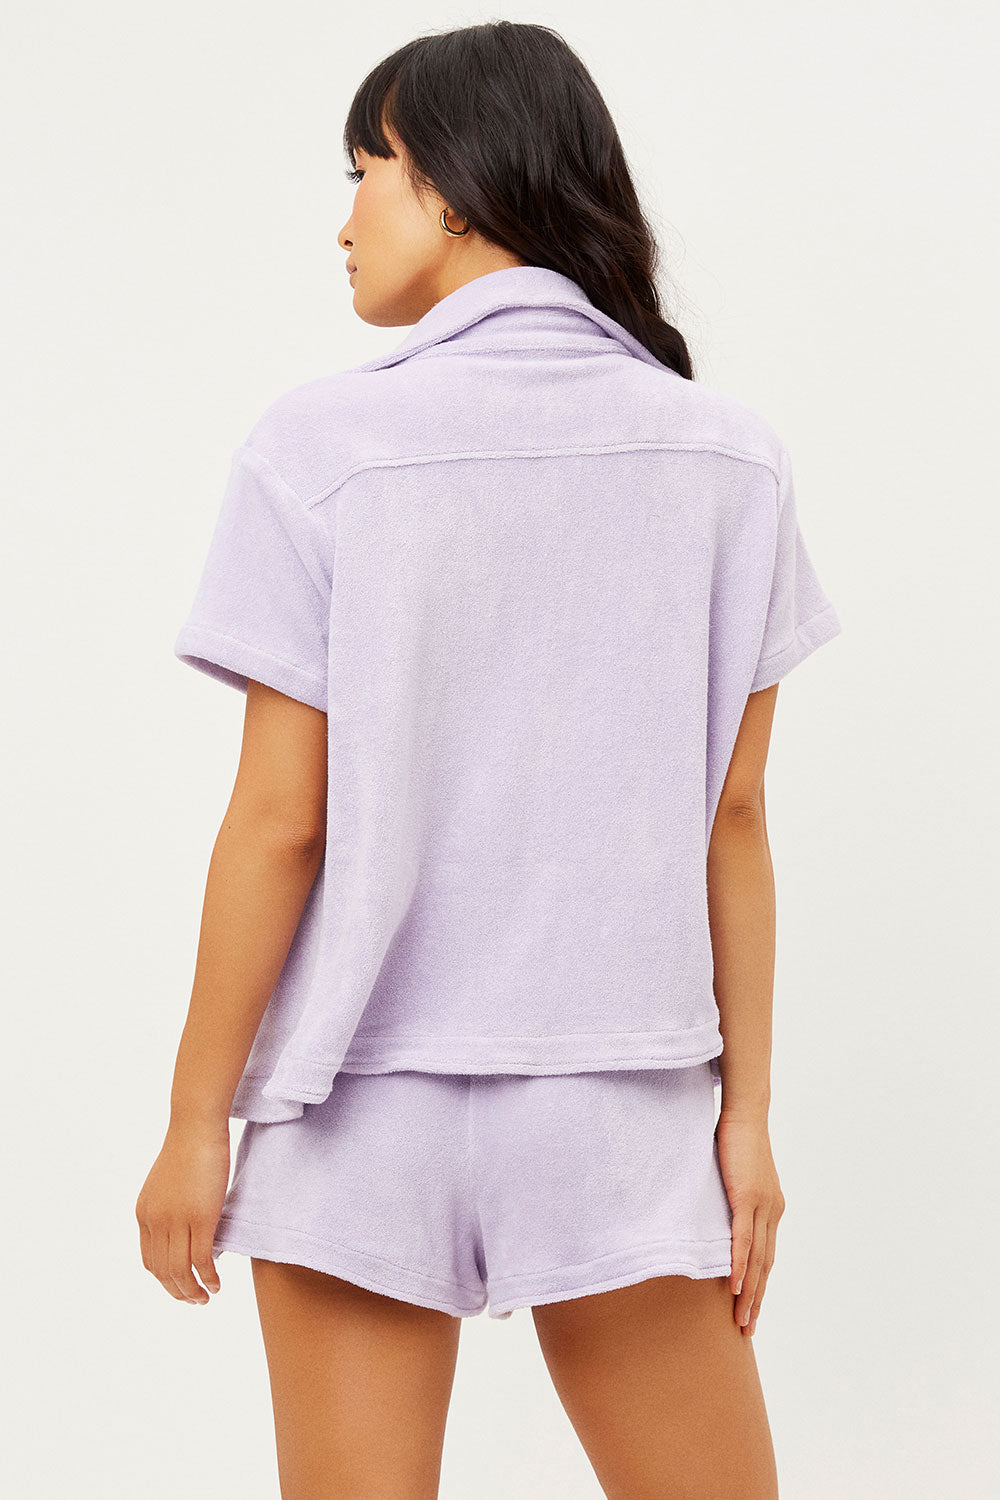 Coco Terry Button Up Shirt - Lilac